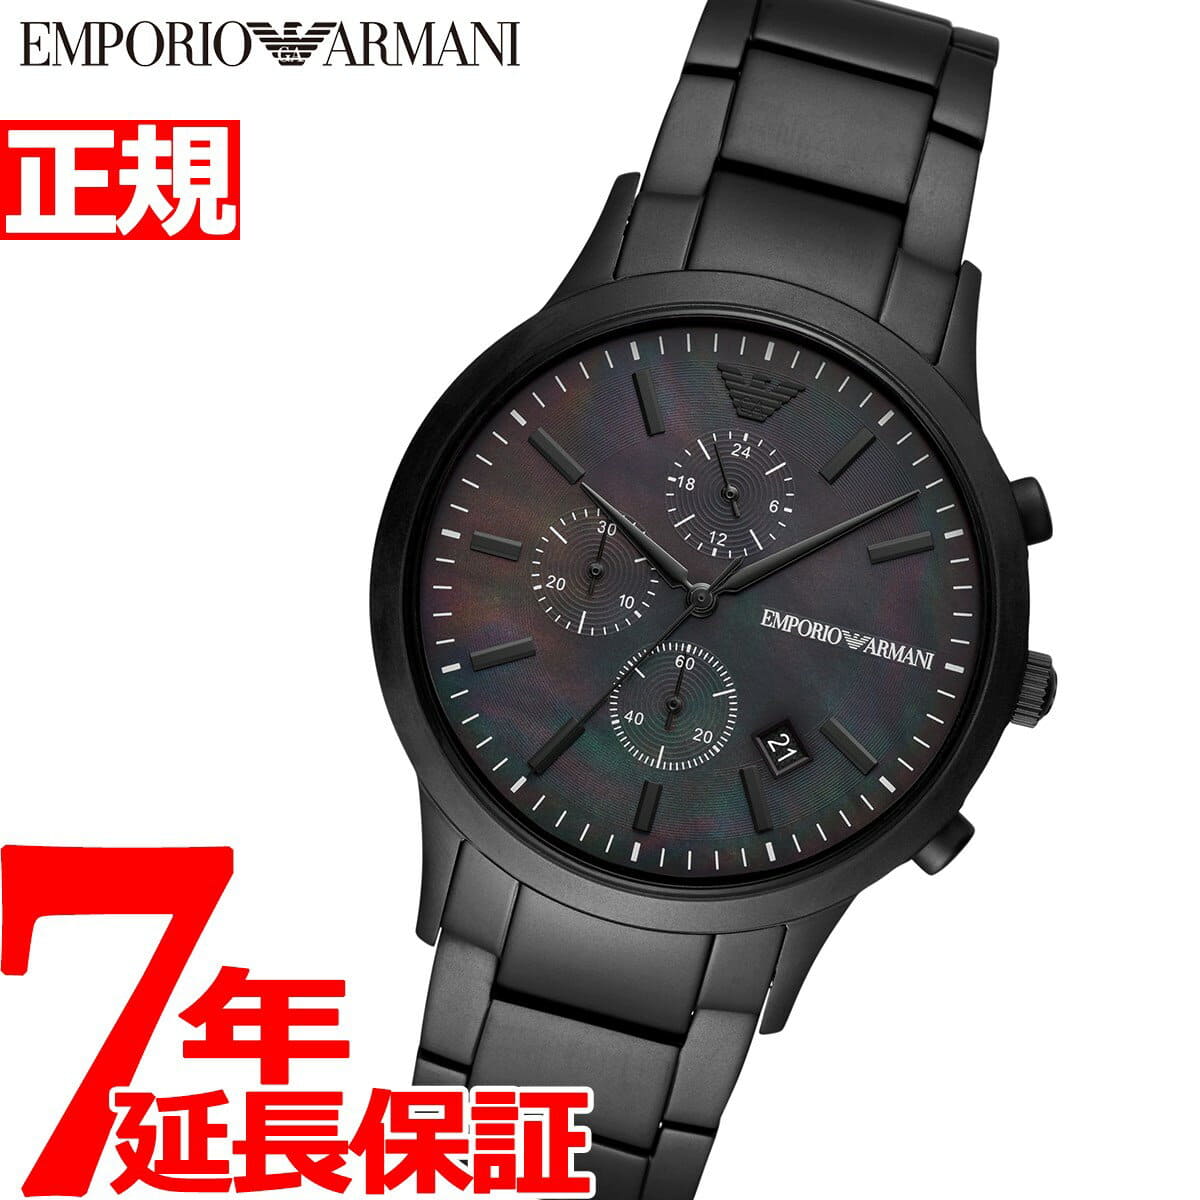 New]It is up to 2,000 & up to 55.5 times Emporio Armani EMPORIO ARMANI mens Chronograph  AR11275 - BE FORWARD Store